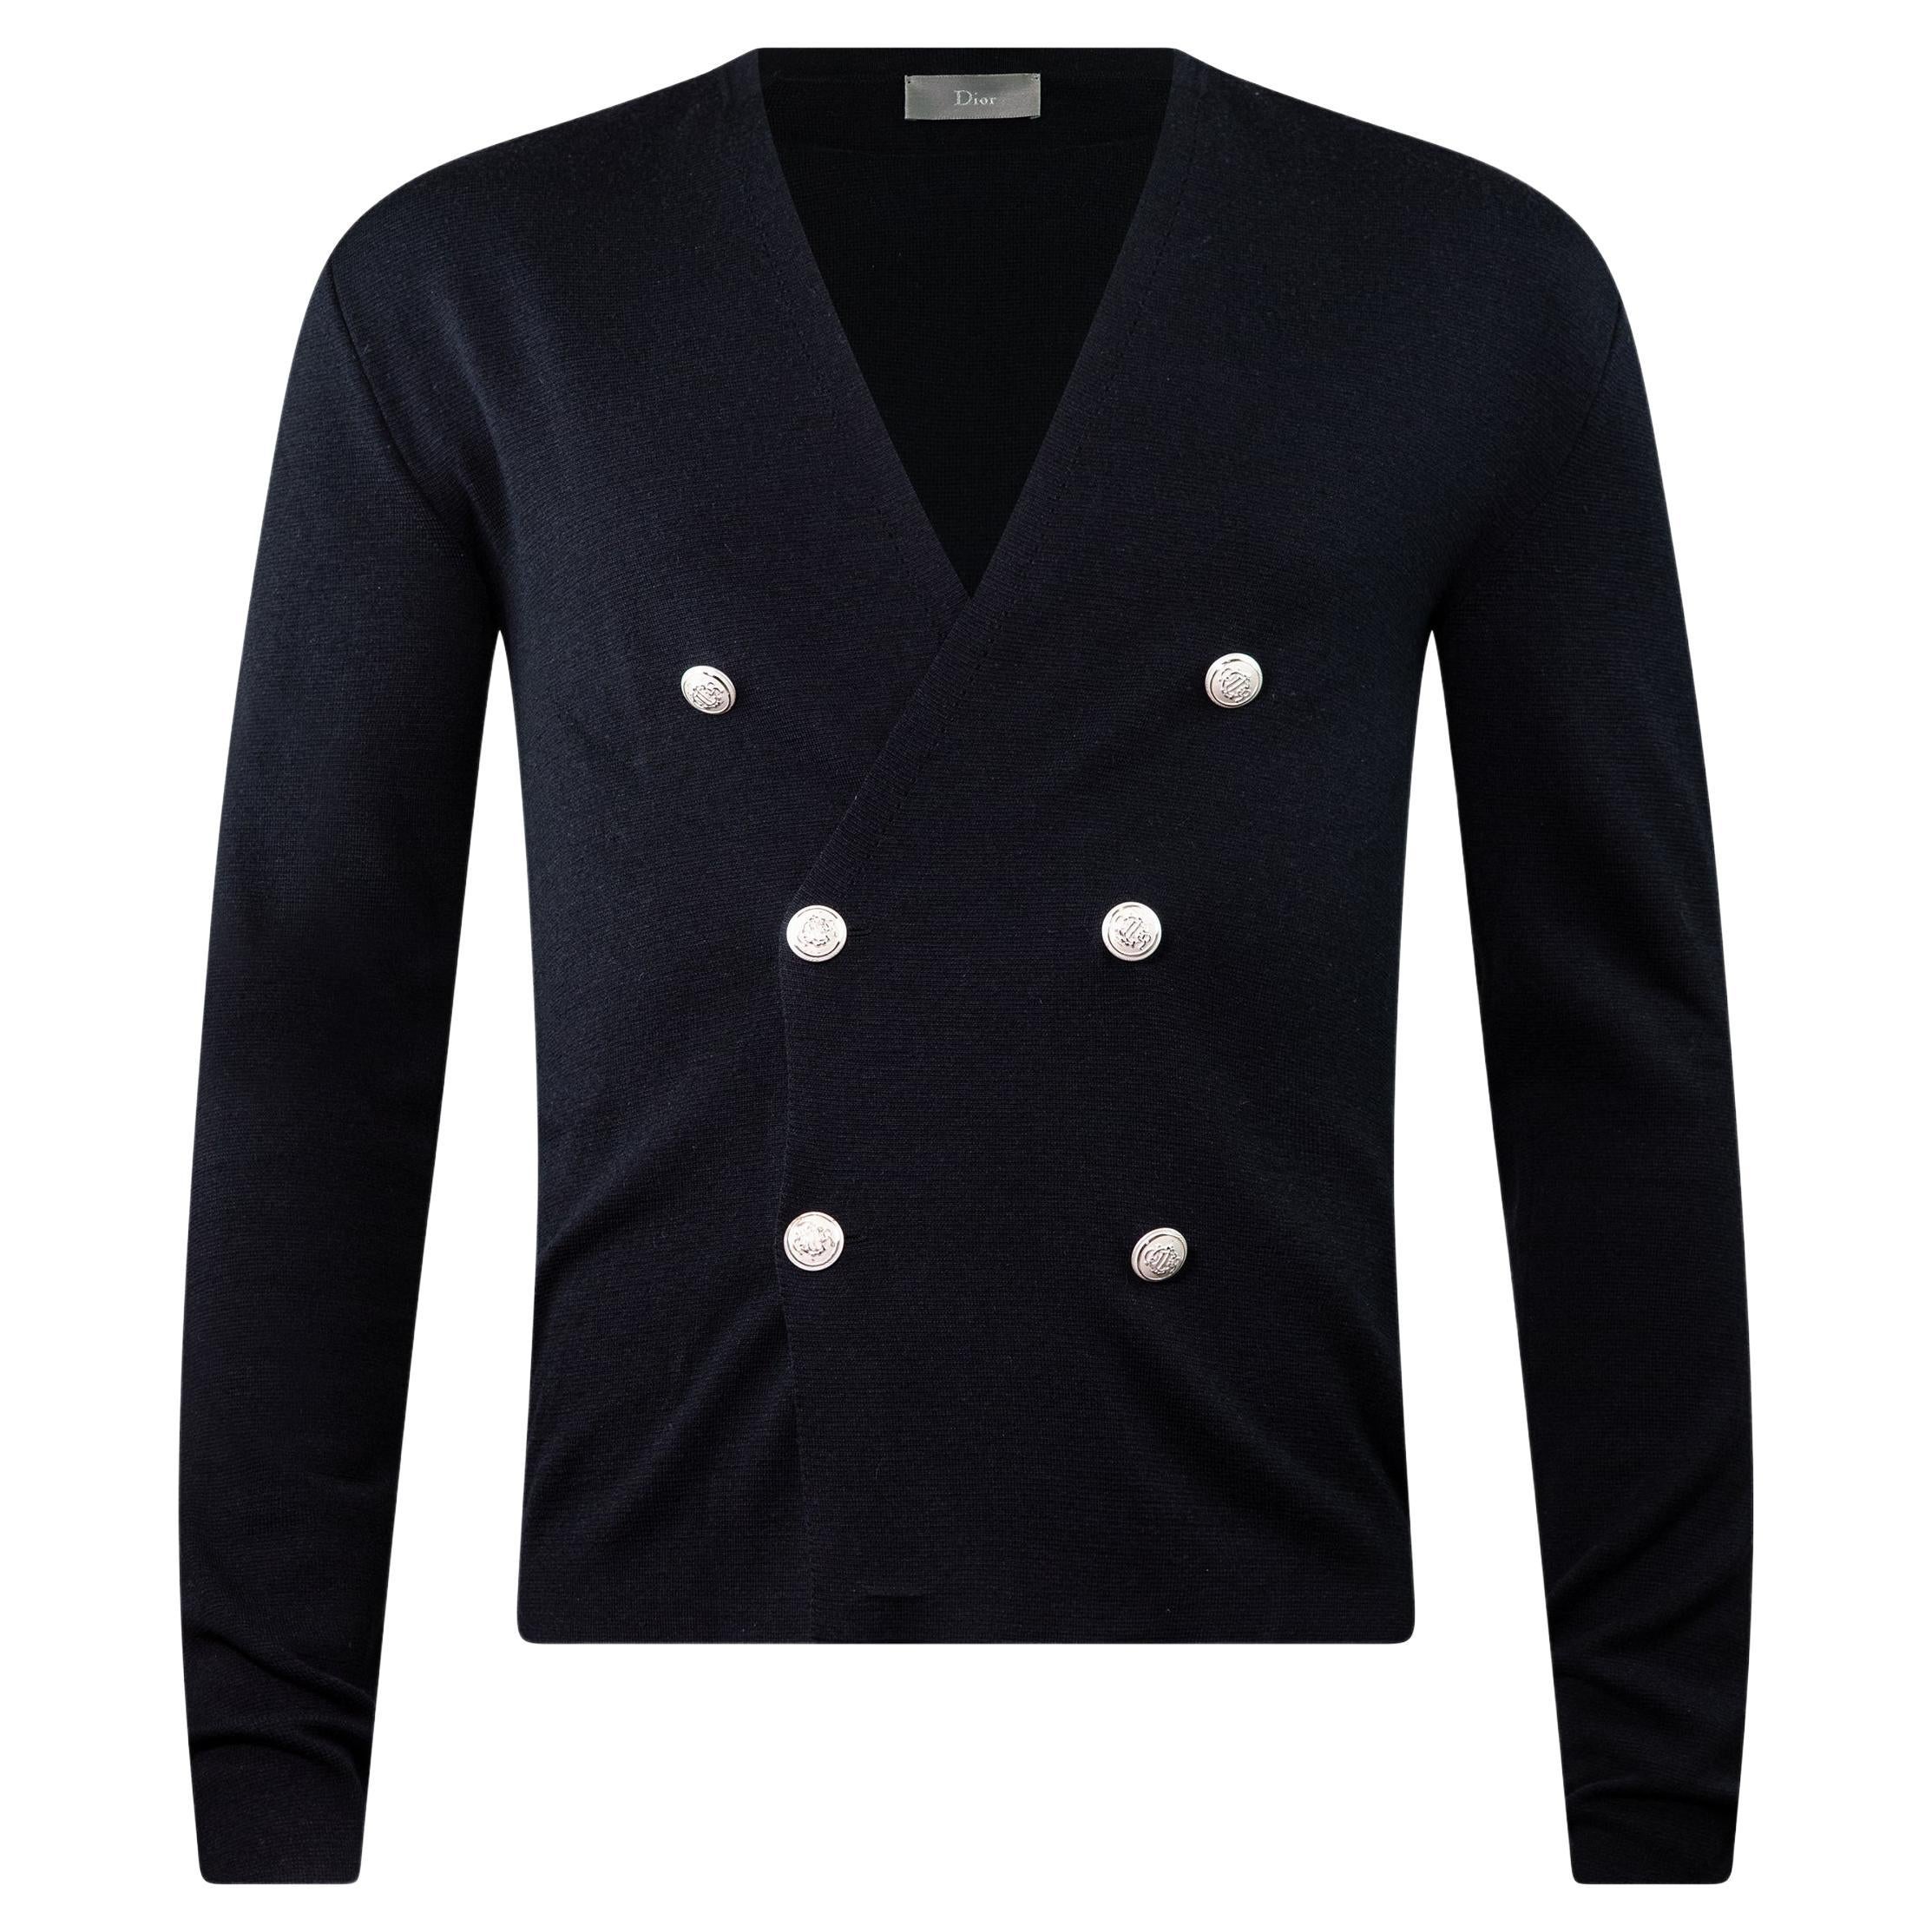 DIOR HOMME By KRIS VAN ASSCHE F/W 2013 Double-breasted Cardigan For Sale